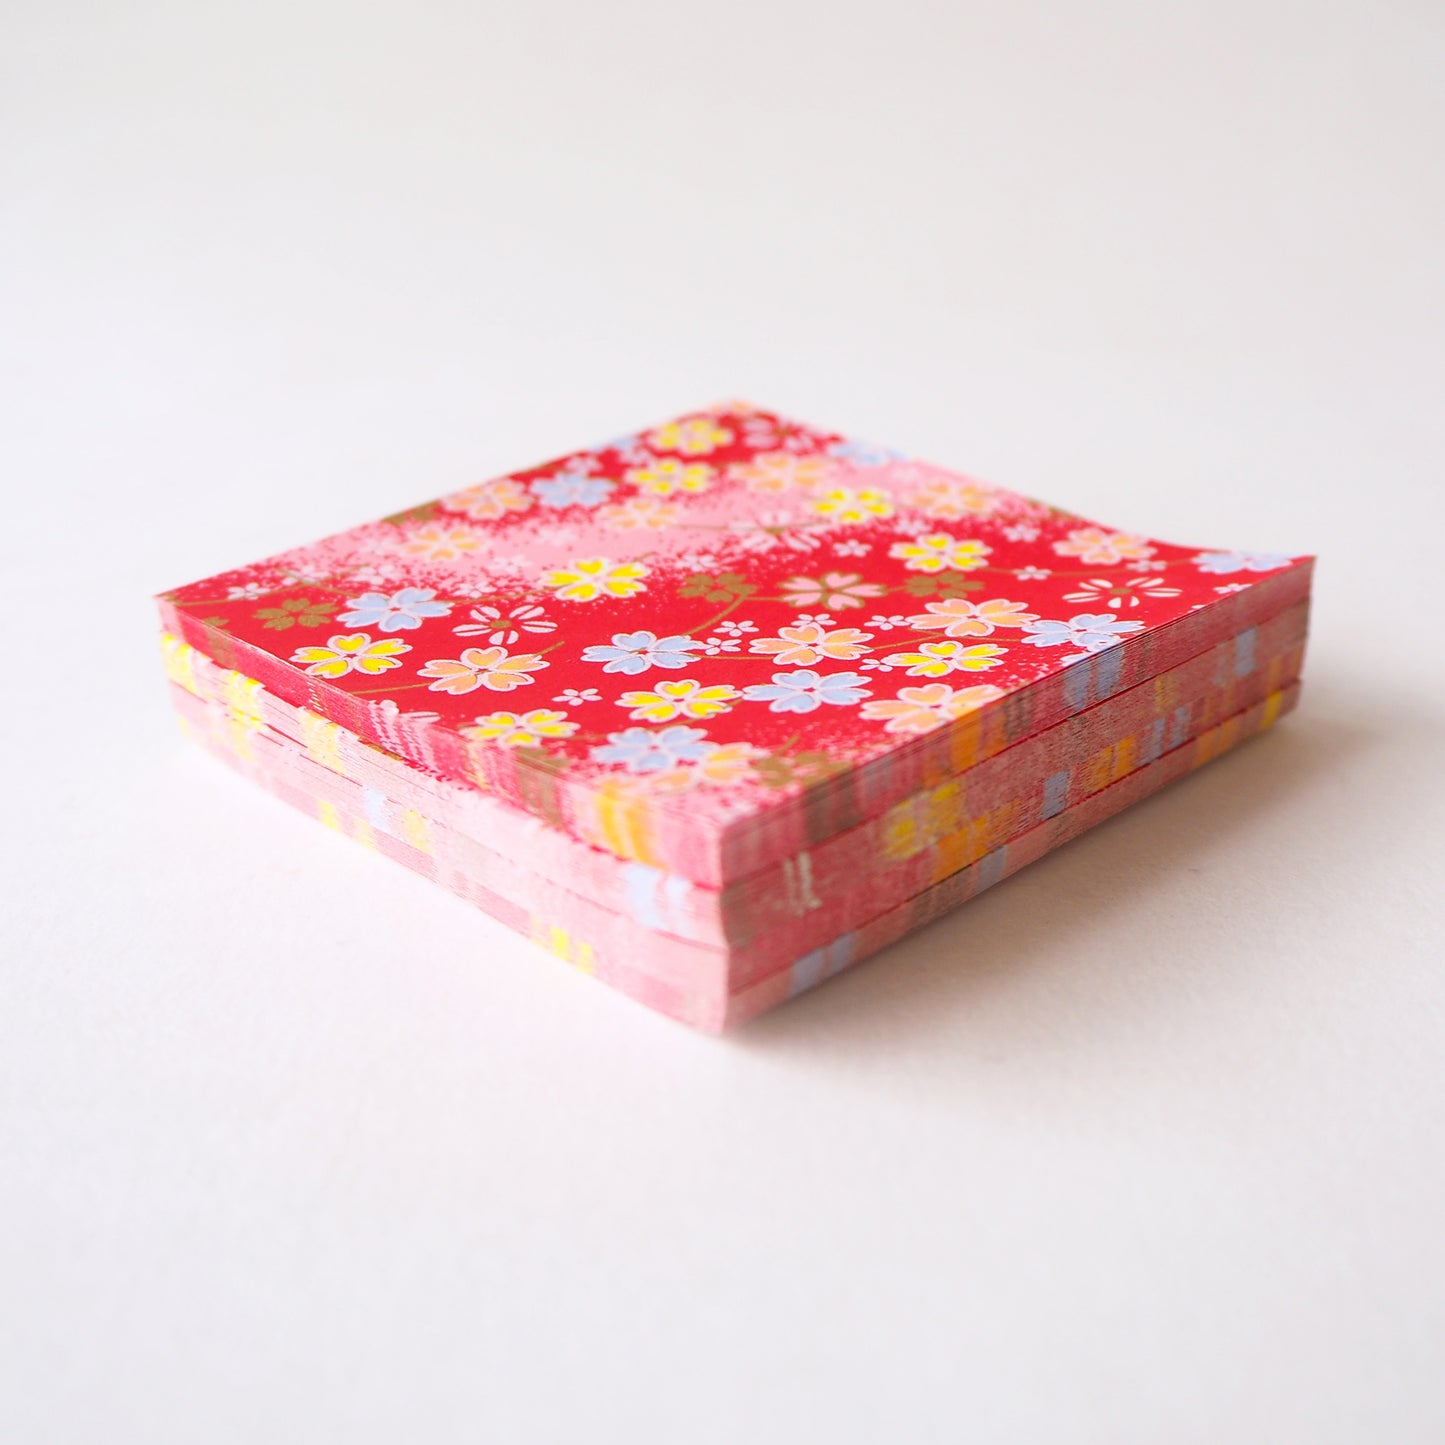 Pack of 100 Sheets 7x7cm Yuzen Washi Origami Paper HZ-501 - Outlined Cherry Blossom Red Gradation - washi paper - Lavender Home London